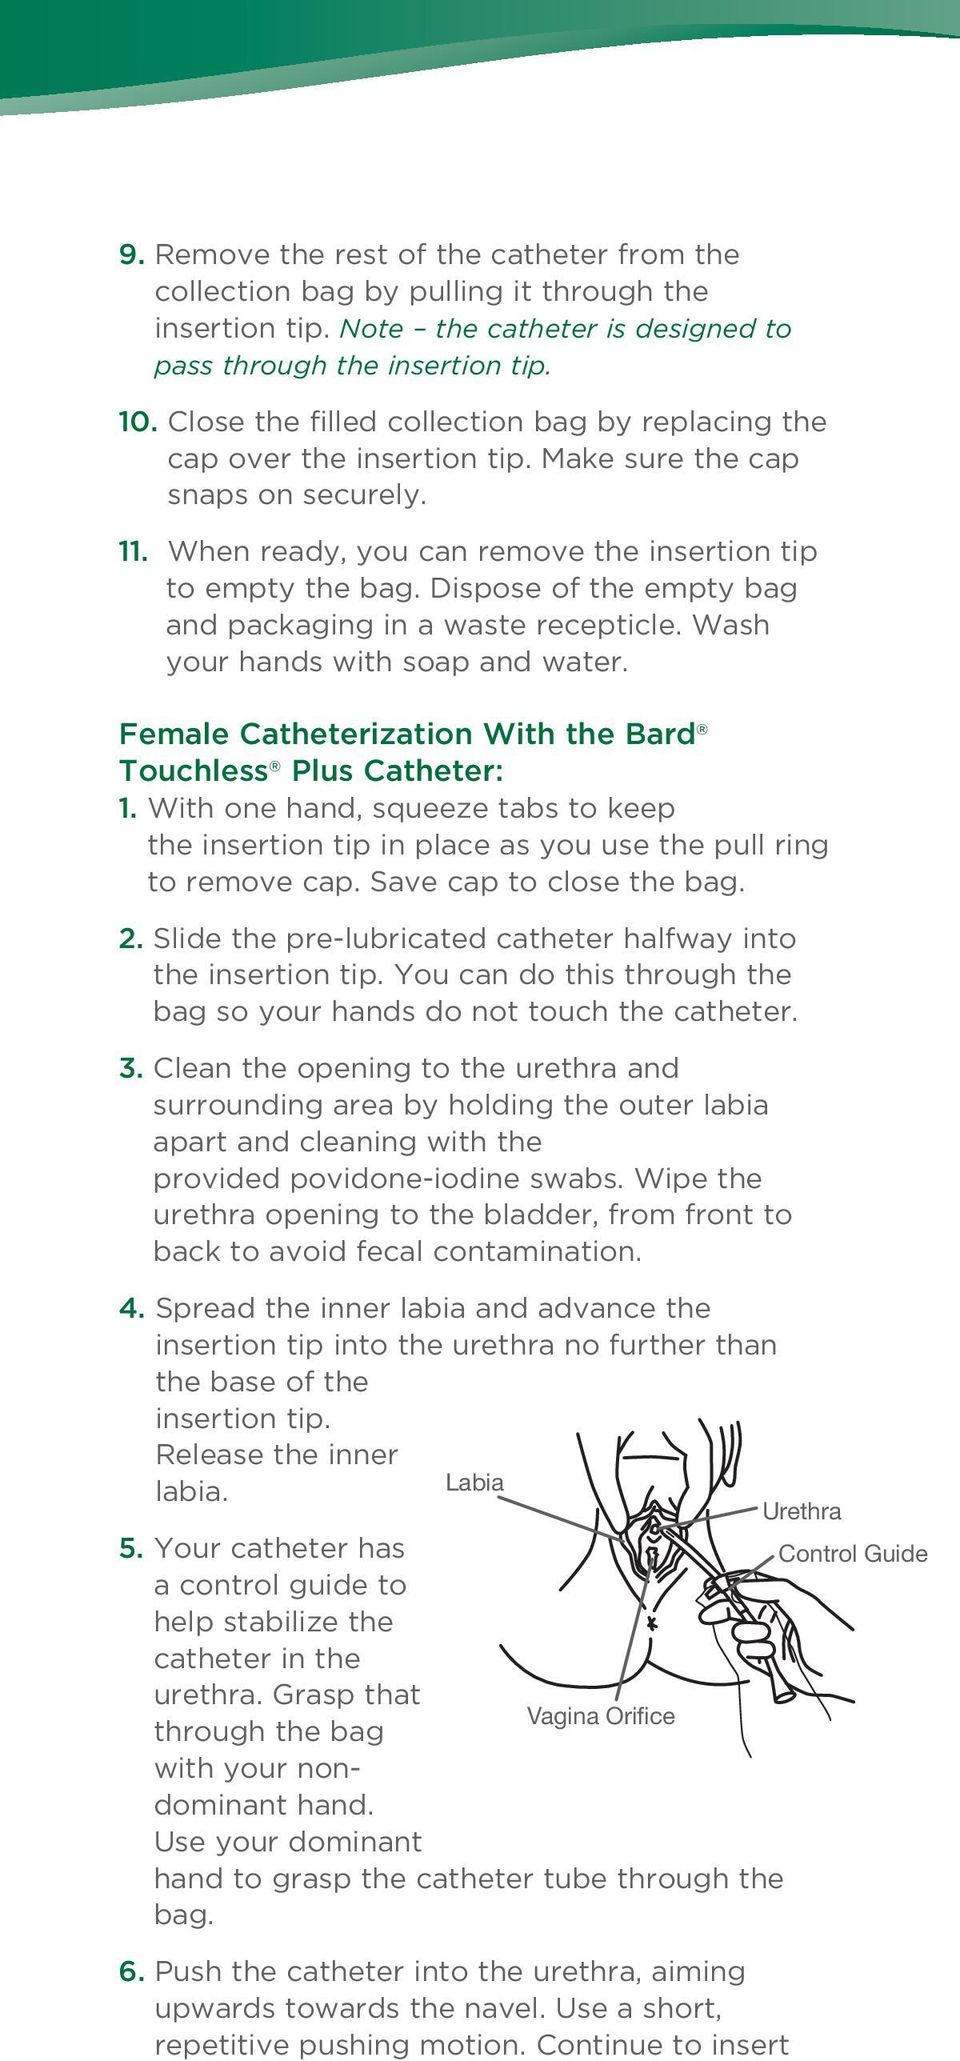 Dispose of the empty bag and packaging in a waste recepticle. Wash your hands with soap and water. Female Catheterization With the Bard Touchless Plus Catheter: 1.